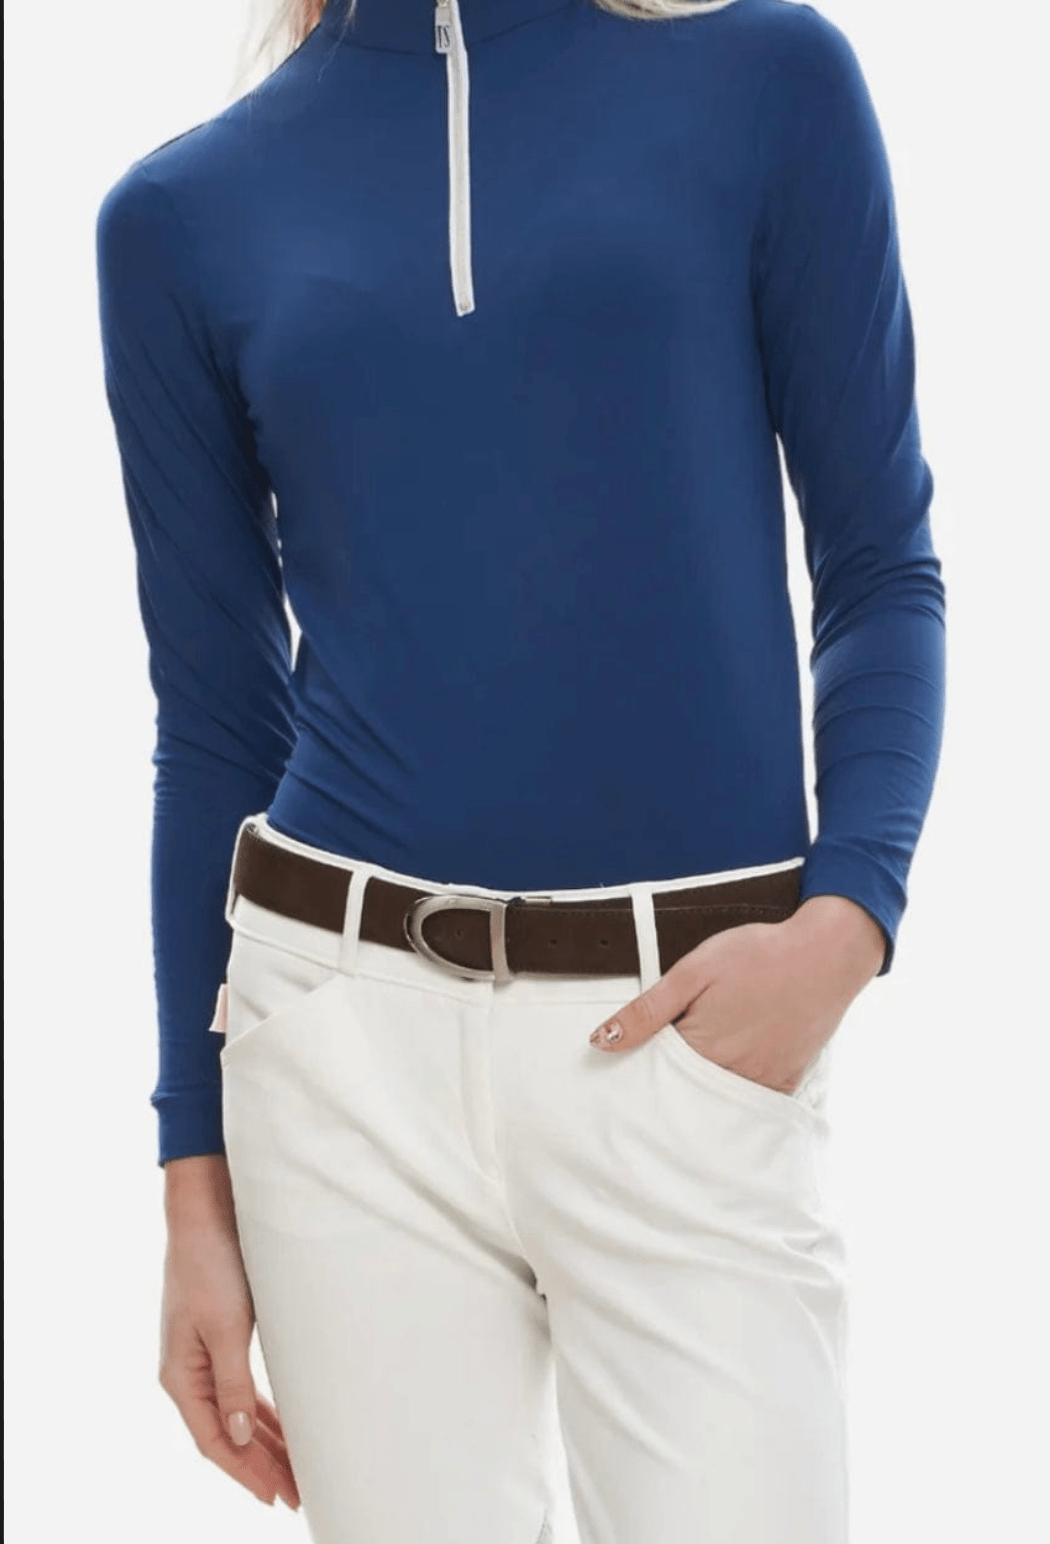 Tailored Sportsman Sun Shirt Blueberry/silver Tailored Sportsman Sun Shirt Long Sleeve Small equestrian team apparel online tack store mobile tack store custom farm apparel custom show stable clothing equestrian lifestyle horse show clothing riding clothes horses equestrian tack store